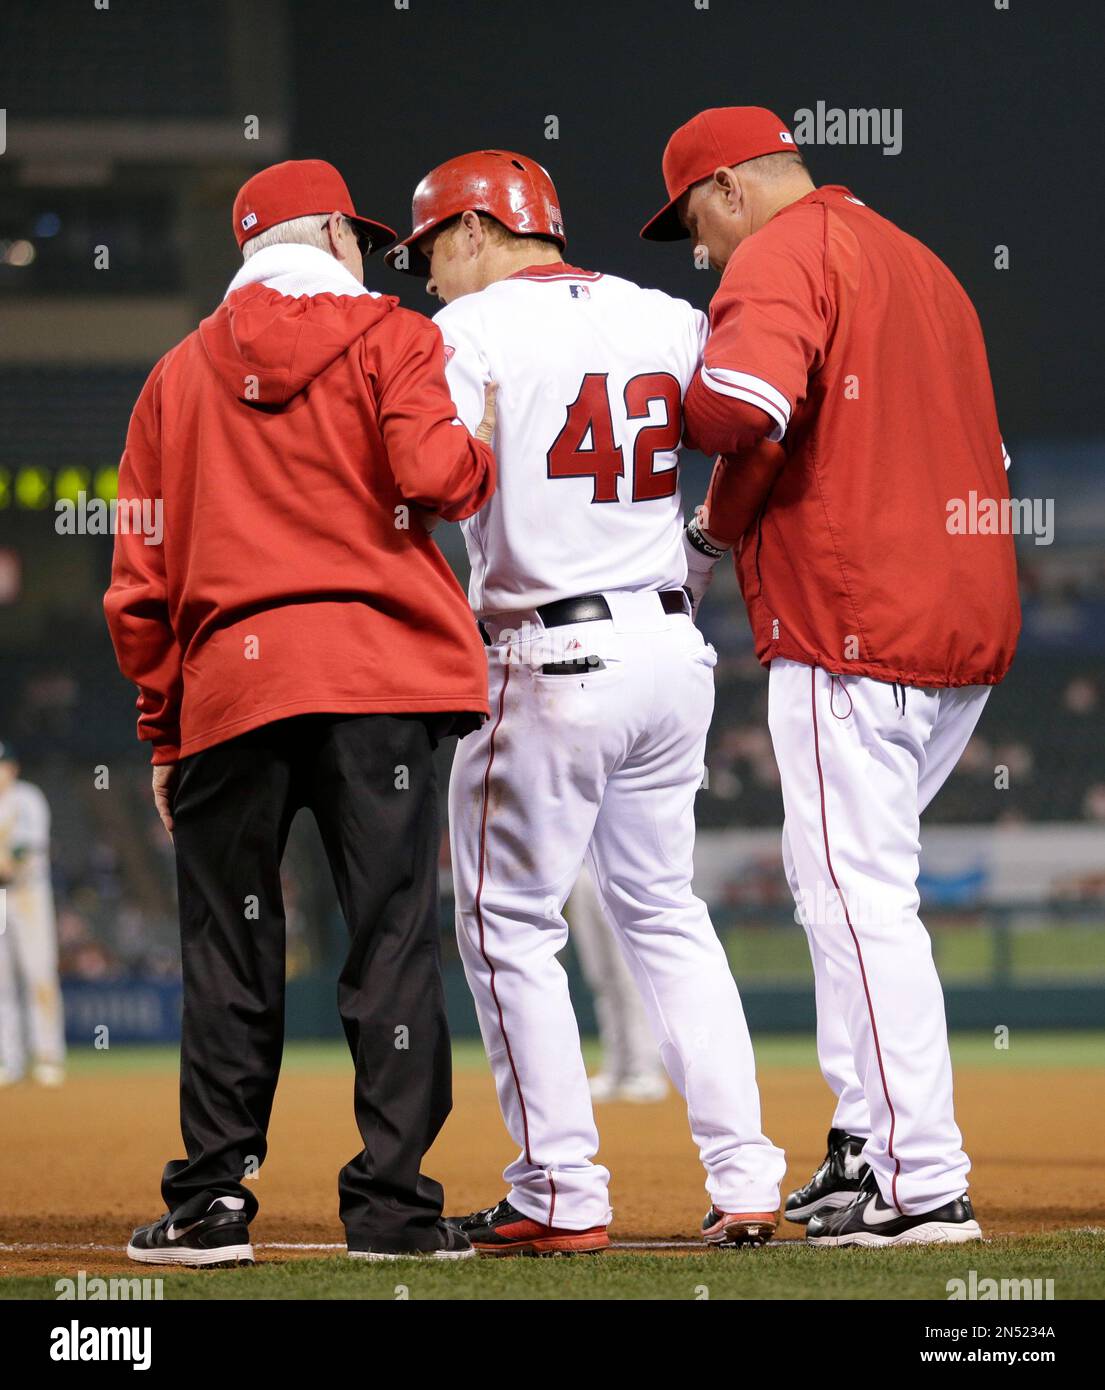 Los Angeles Angels' Kole Calhoun, center, is helped off the field